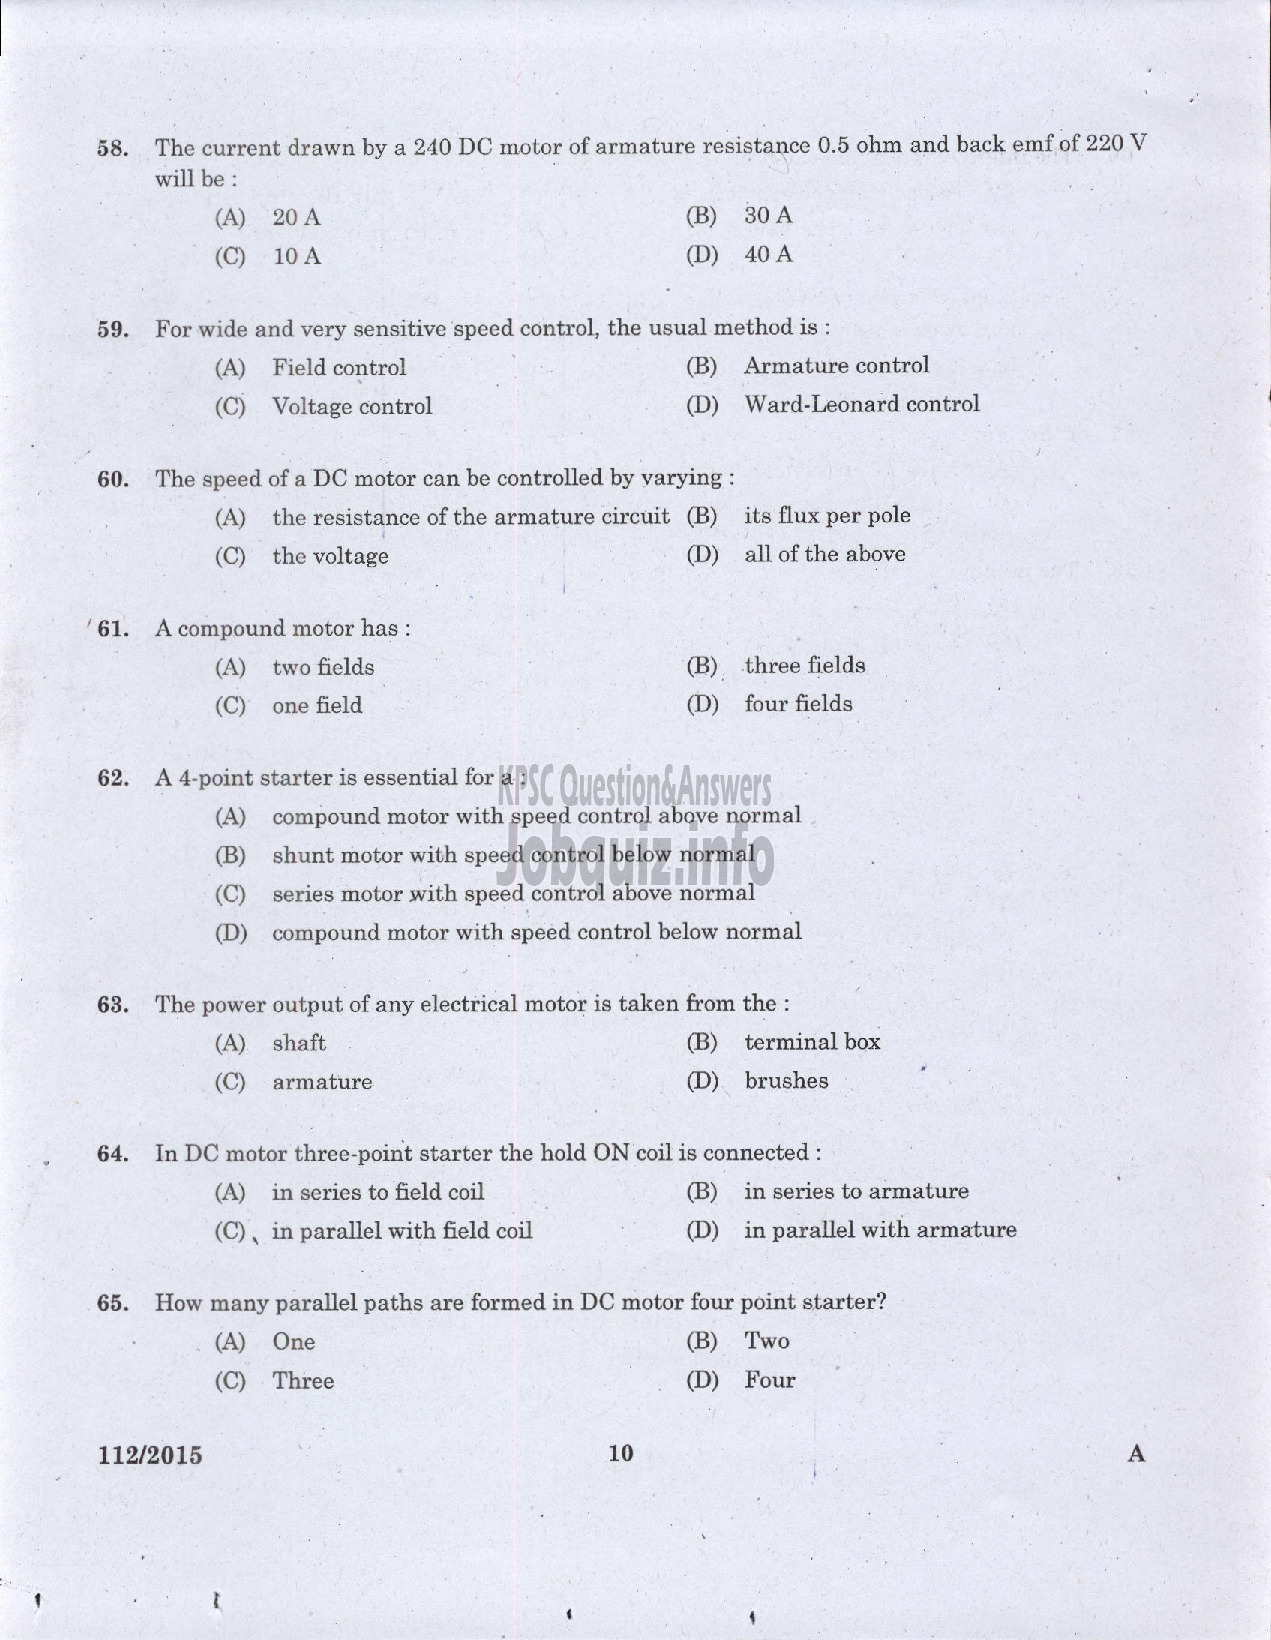 Kerala PSC Question Paper - TRADESMAN ELECTRICAL TECHNICAL EDUCATION/ELECTRICIAN GROUND WATER /ELECTRICIAN GR II PRINTING GOVT PRESSES ELECTRICIAN AGRICULTURE /ELECTRICIAN GR II THE KERALA CERAMICS LTD-8